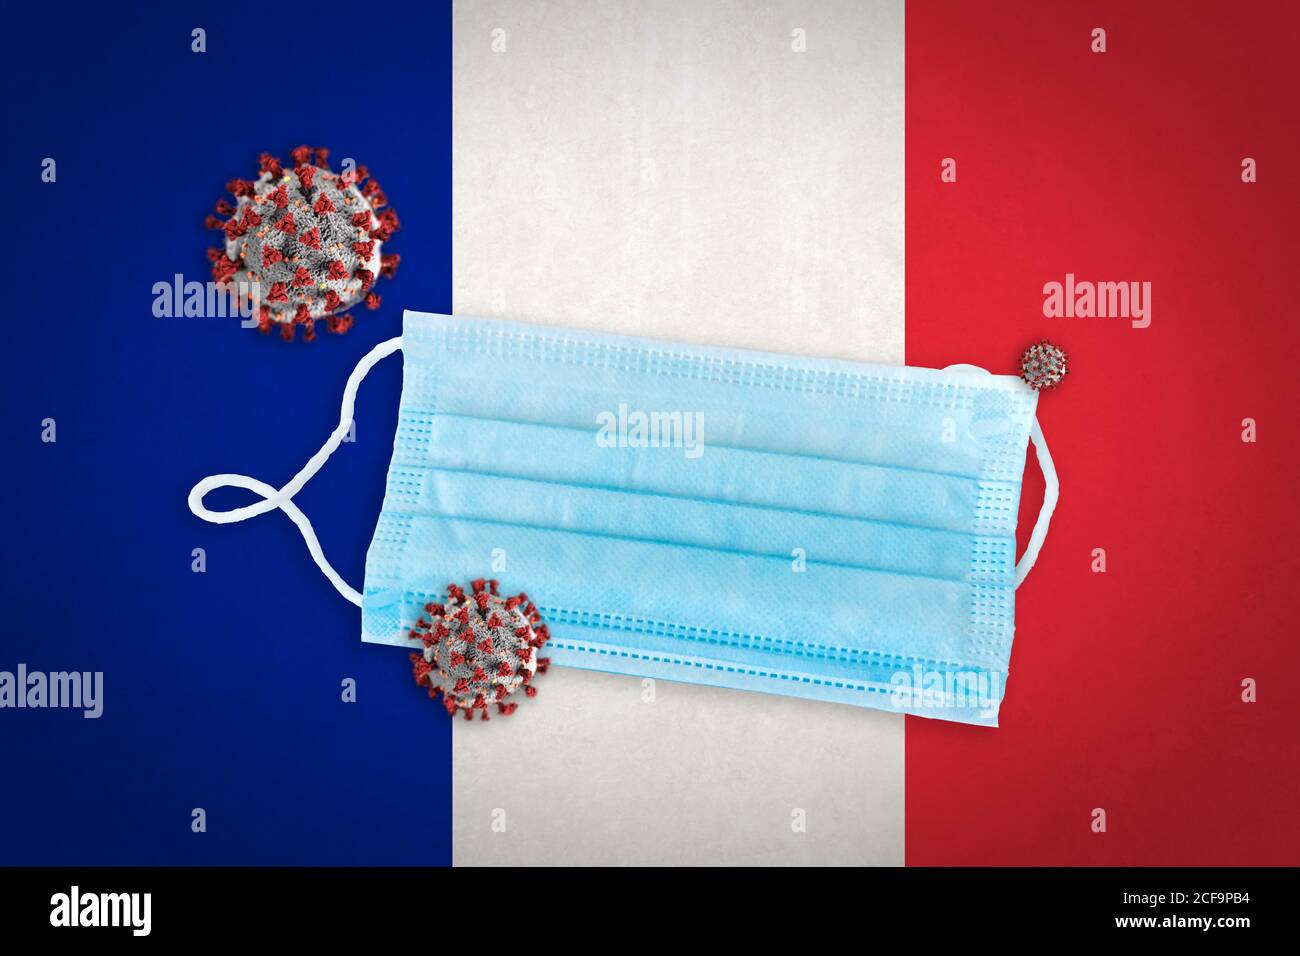 Concept of Coronavirus or Covid-19 particles and surgical face mask over flag of France in background. Stock Photo